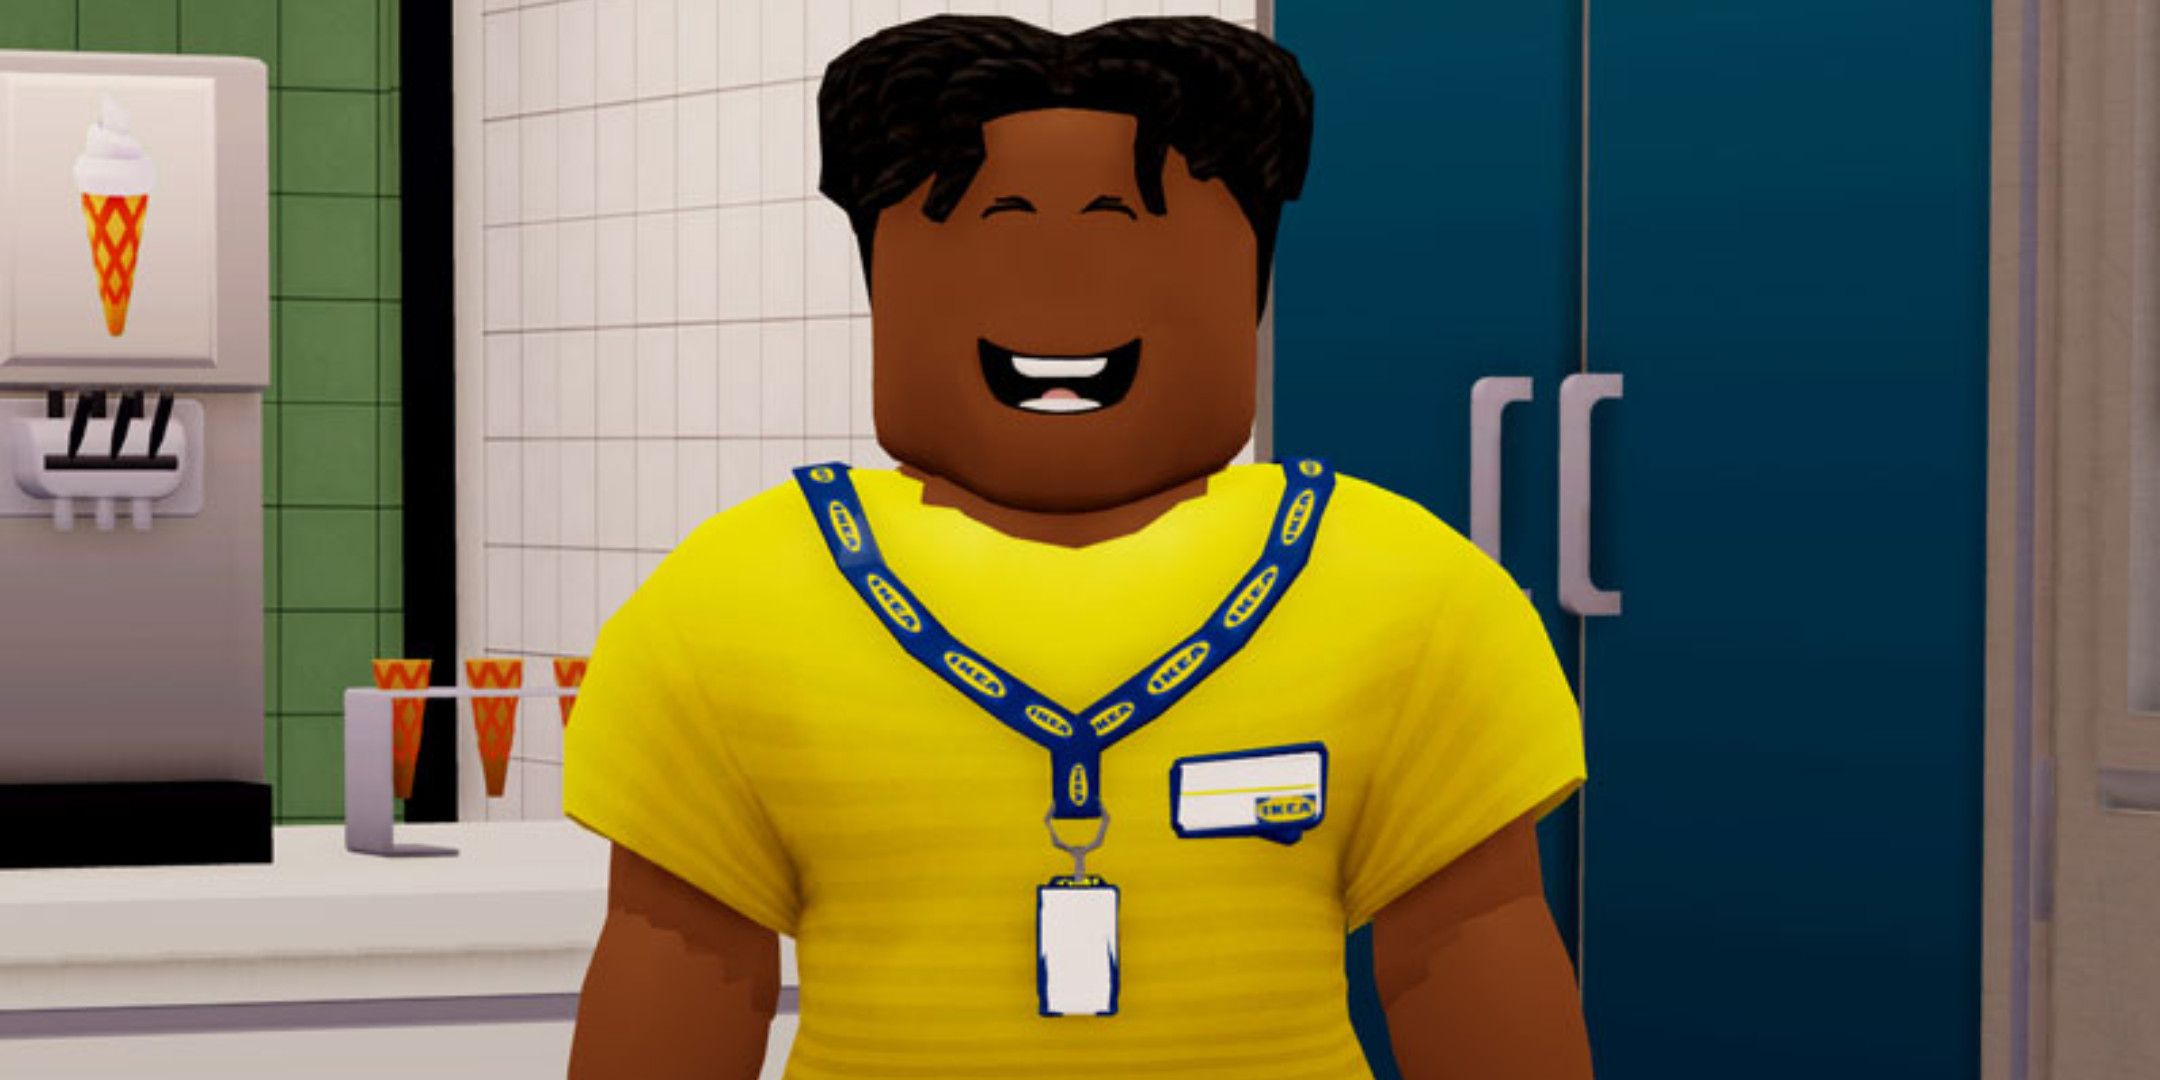 A Roblox avatar in a yellow shirt with an Ikea lanyard